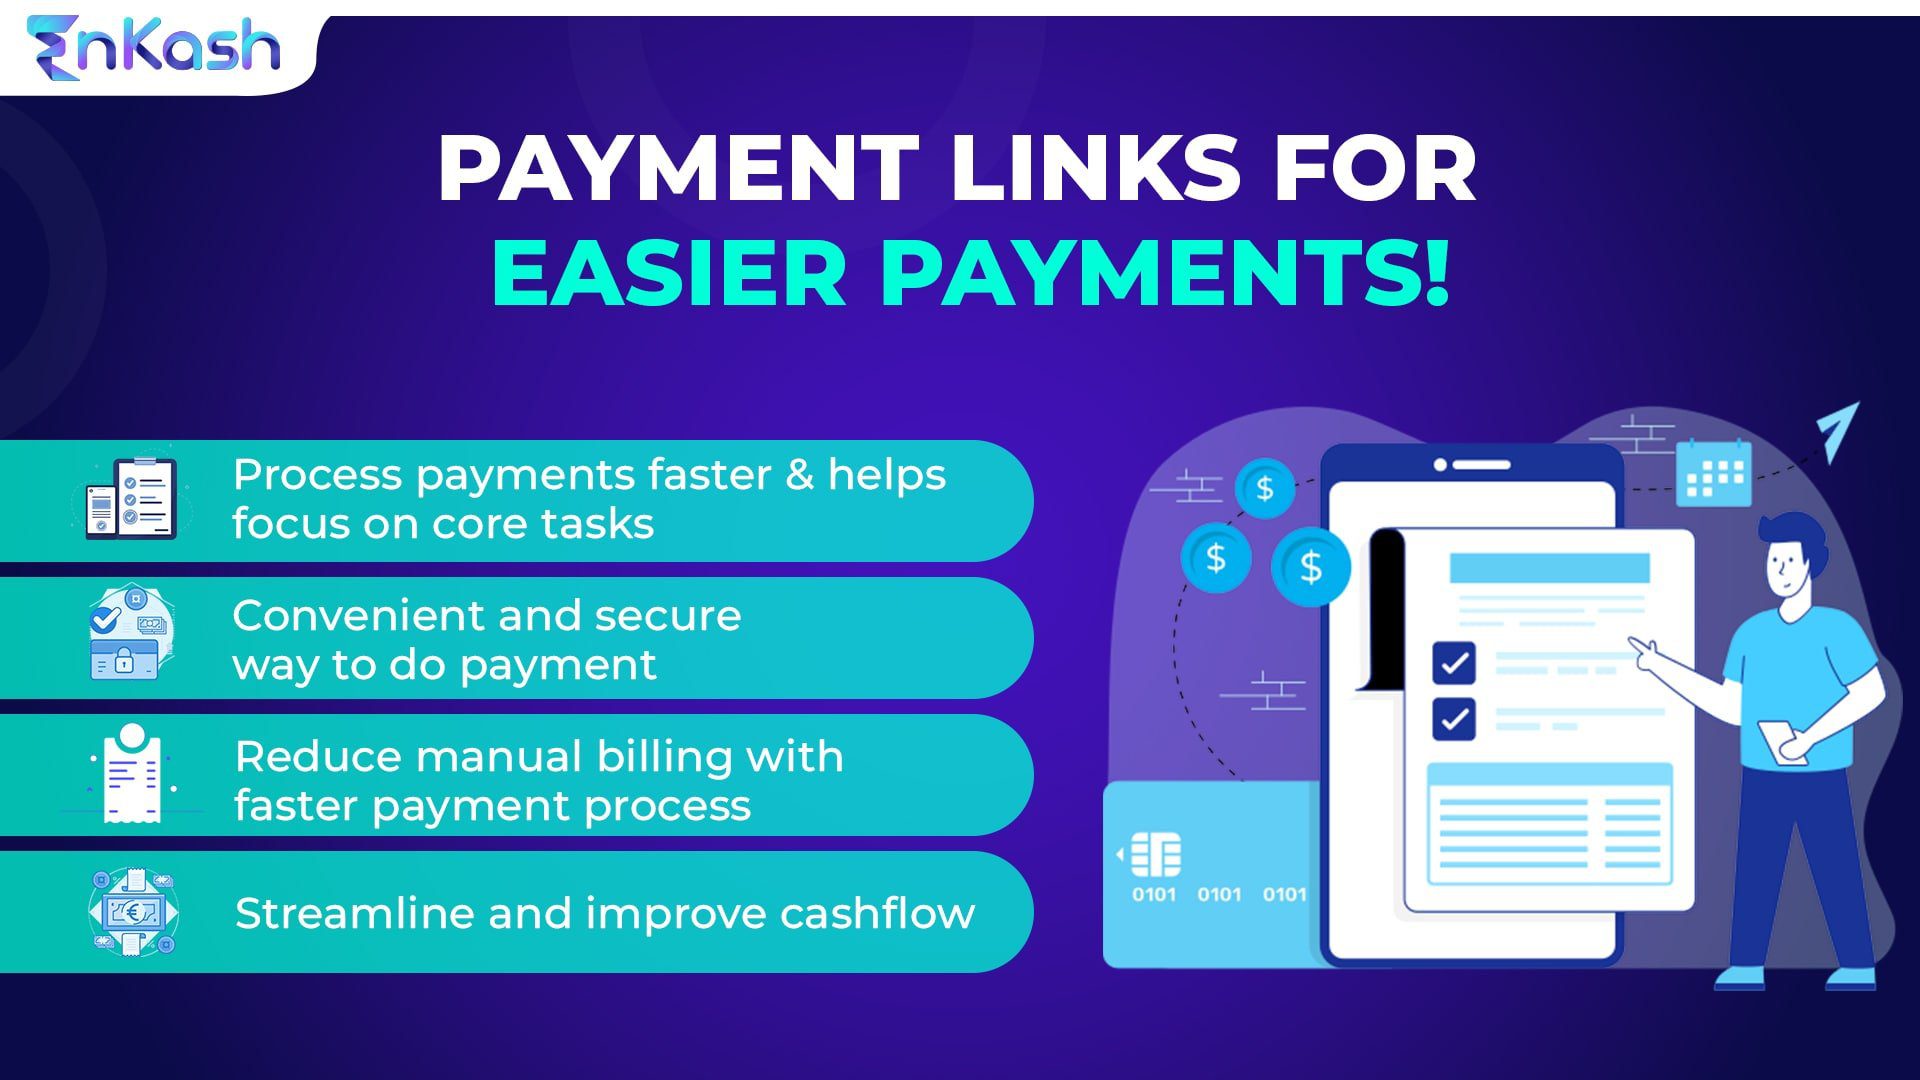 Payment links for easier payments